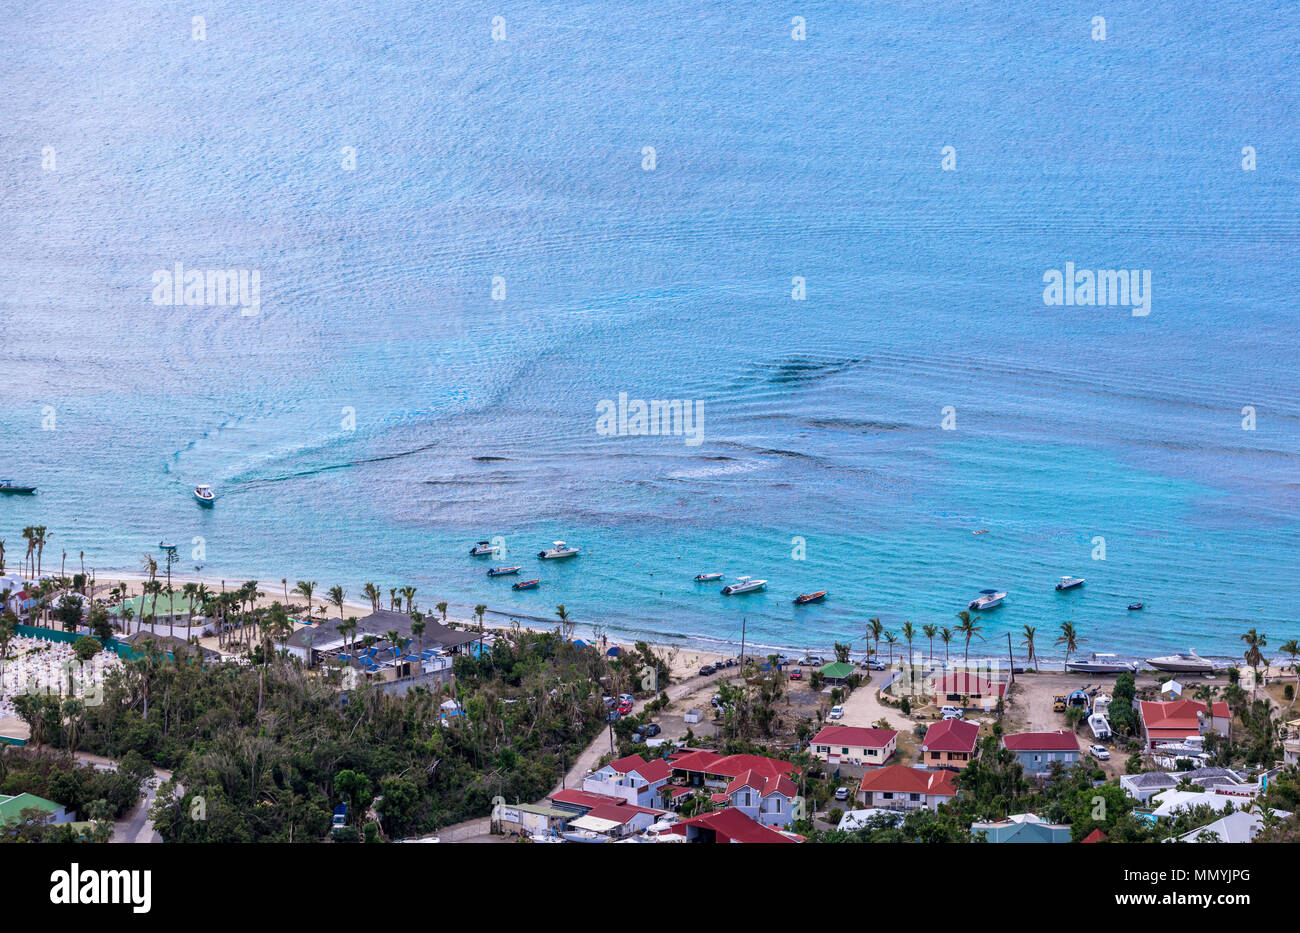 detail image of the beach in Lurin, St Barts Stock Photo